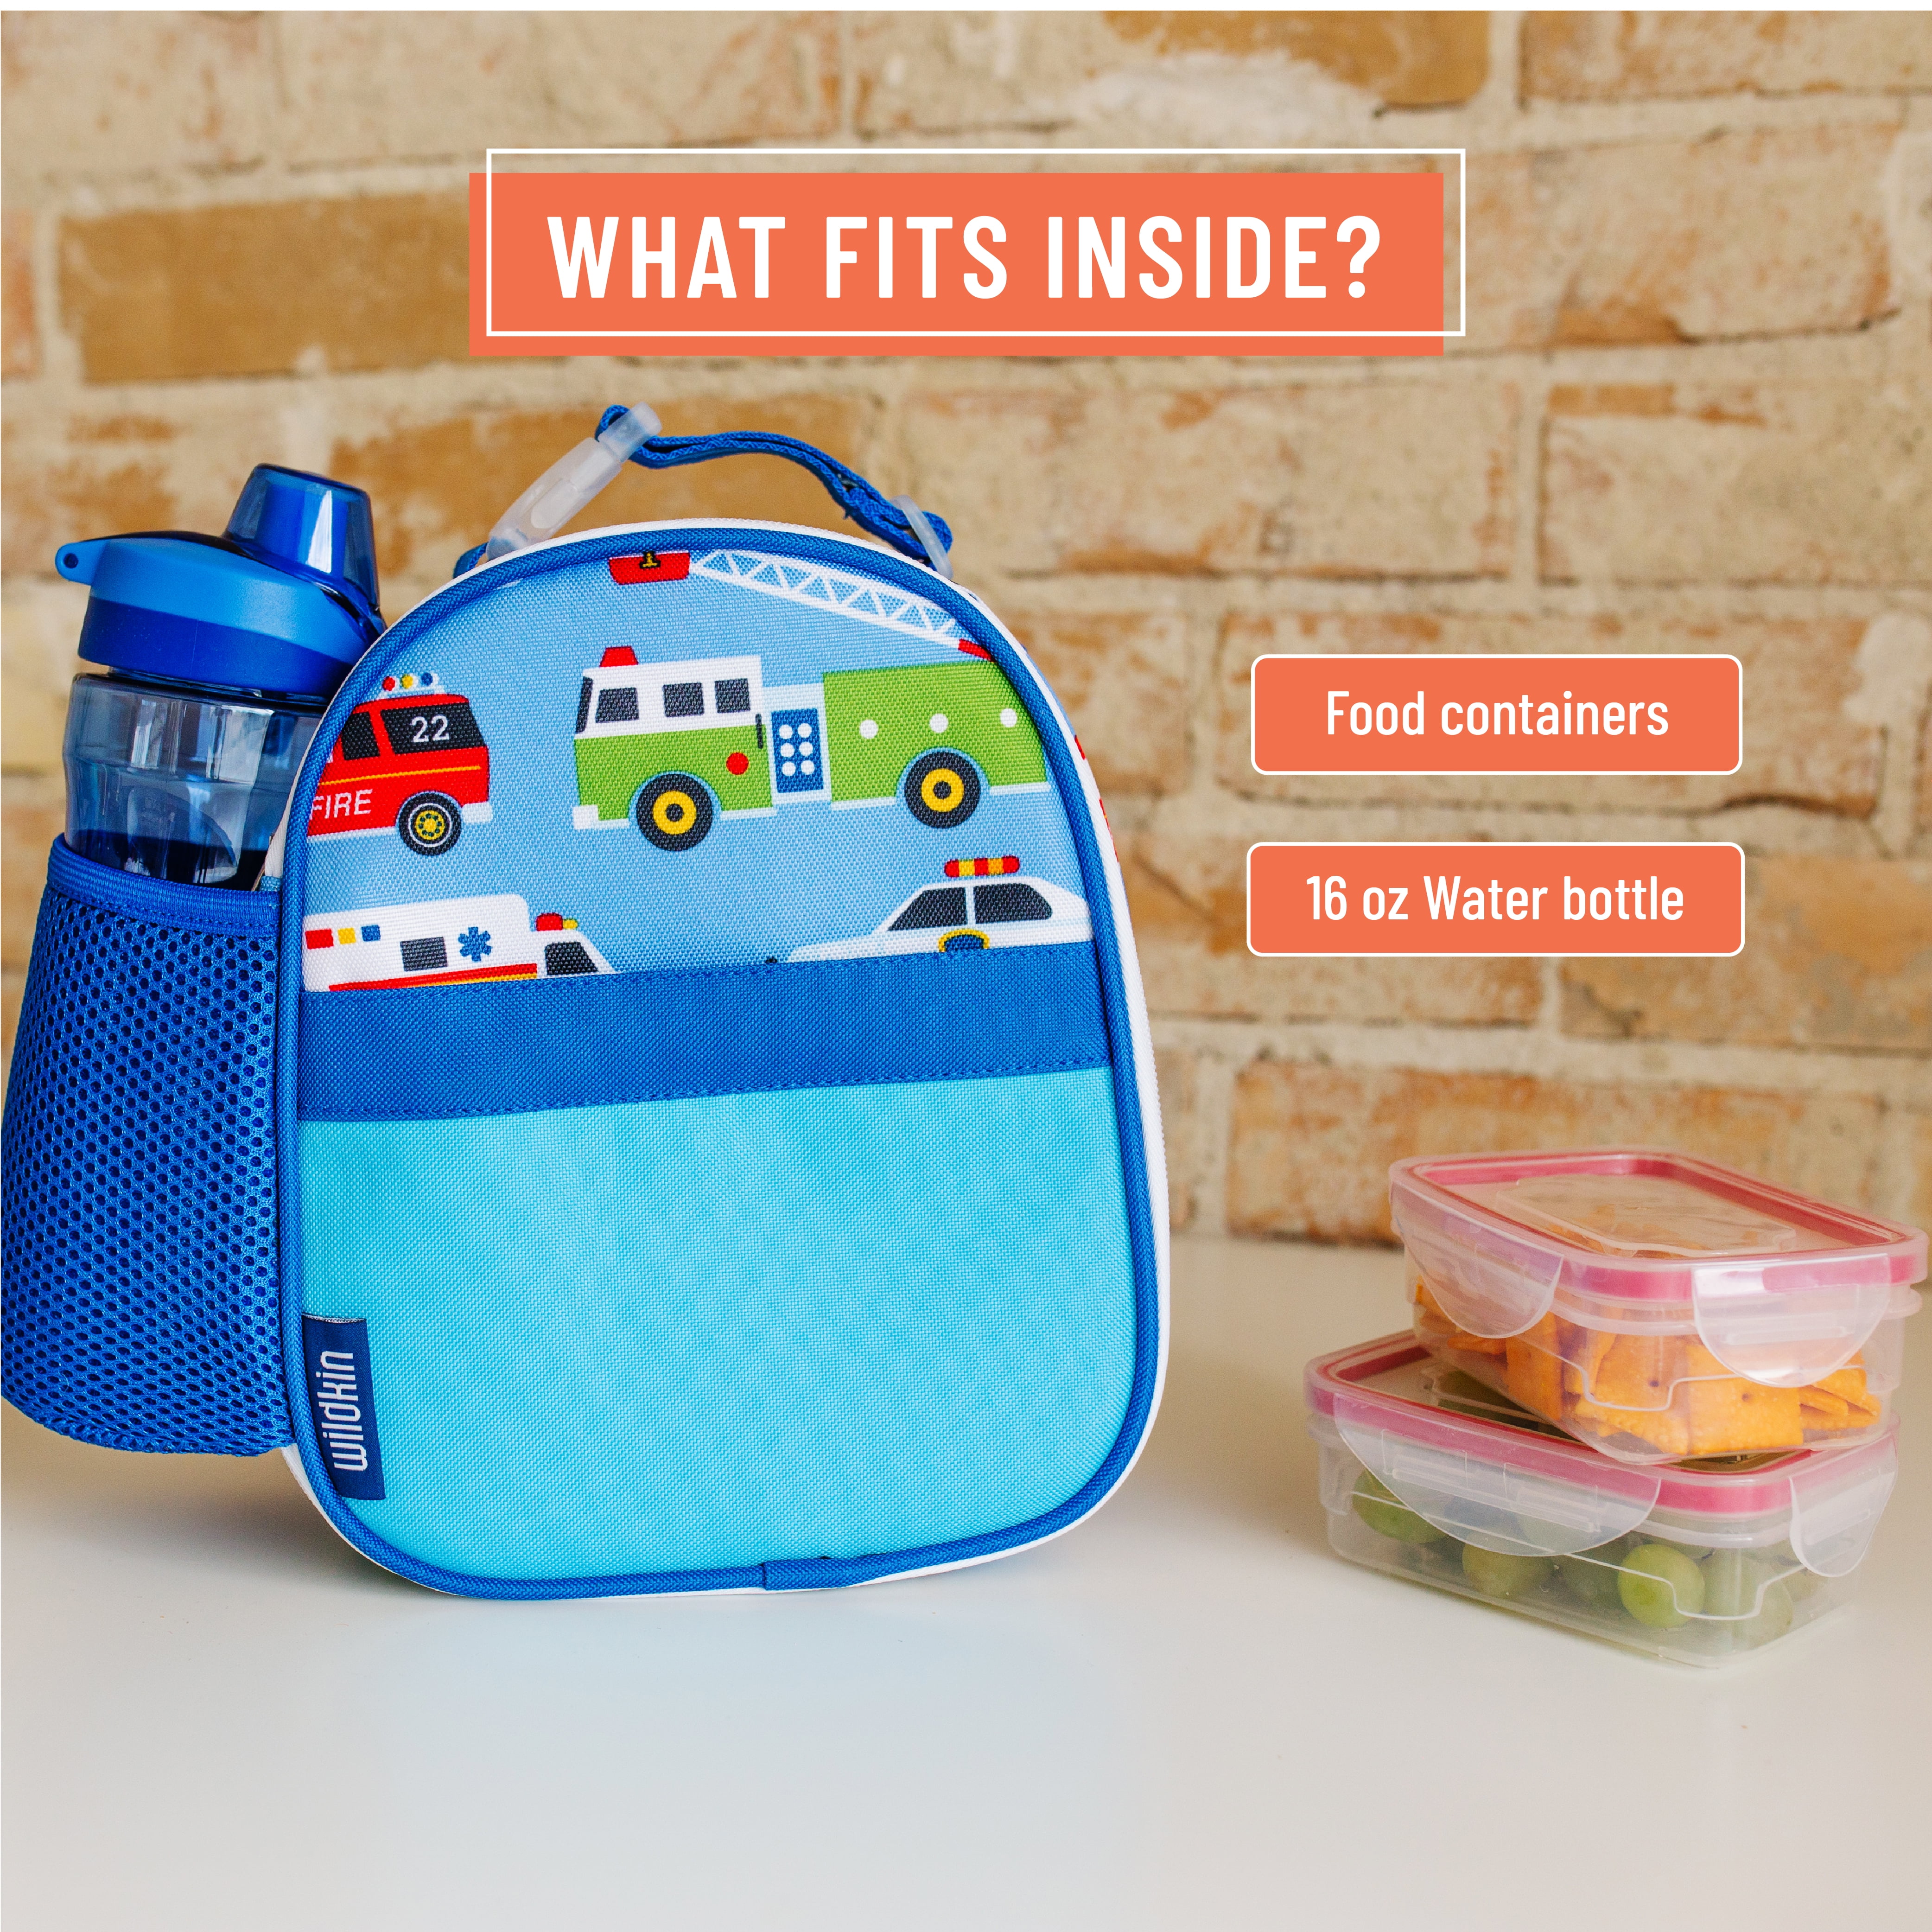  Wildkin Classic Square Shape Insulated Lunch Bag for Kids, 9.75  x 7 x 3.25 Inches, Trains, Planes and Trucks Color, Polyester Material,  PVC, BPA & Phthalate-Free: Kids Lunch Bag: Home 